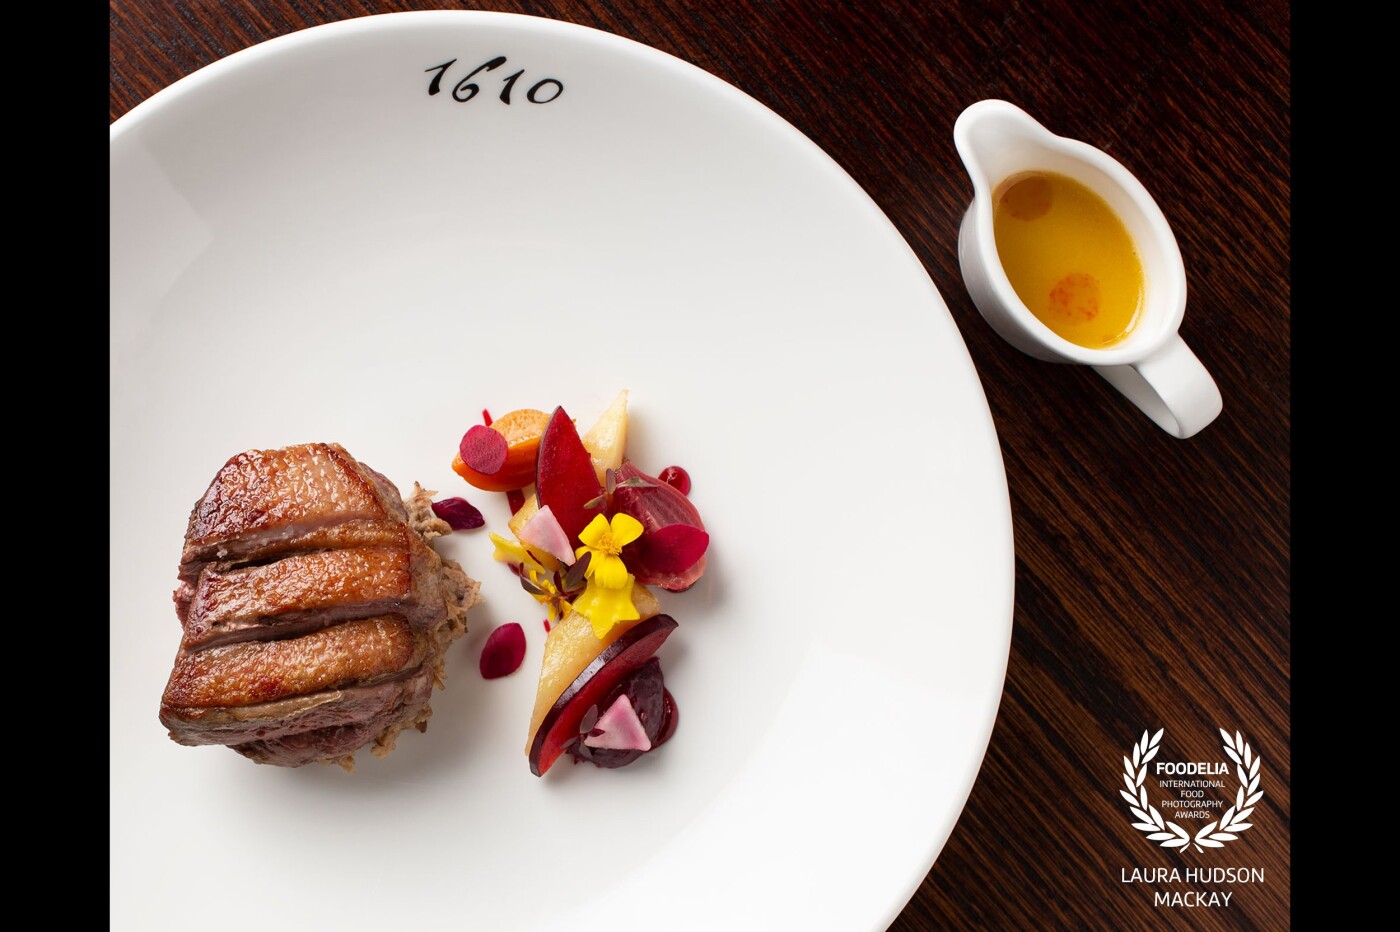 Incredible dish of Salt-Aged Duck, Beetroots and Plums. It’s such a joy to photograph food for The Globe Inn 1610. The creations presented by the Chefs are amazing!